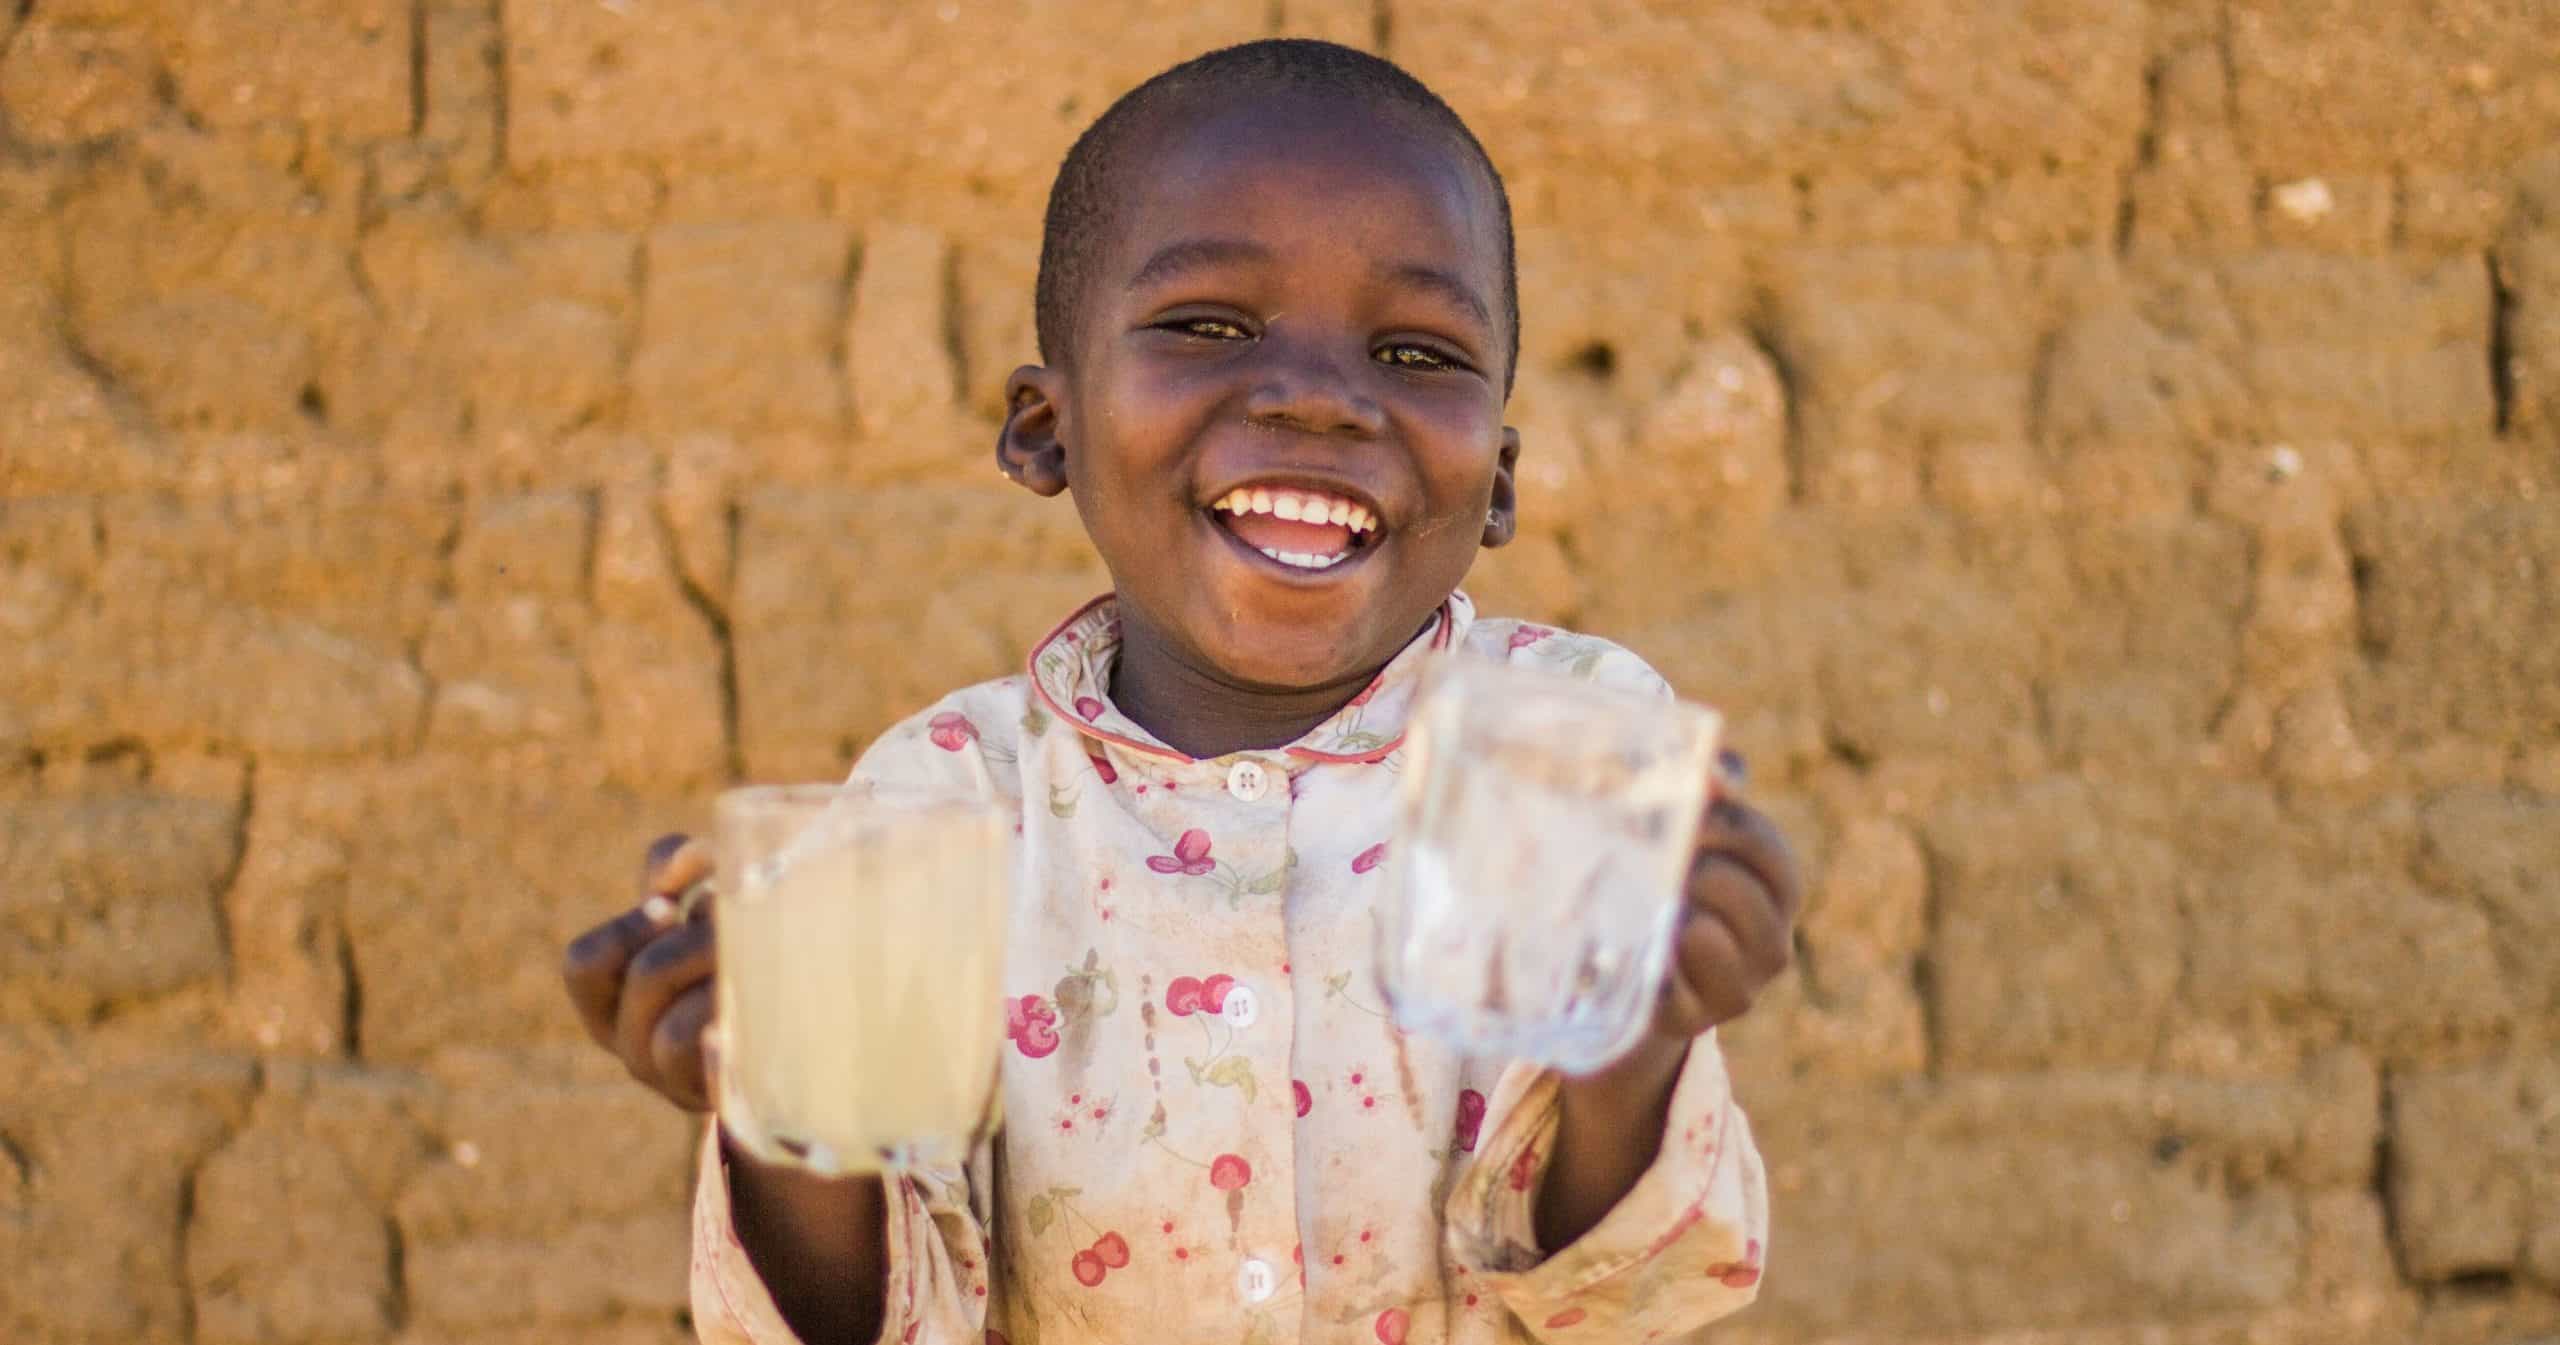 Smiling young girl holding two glasses of water. one with clean water and one with dirty water.